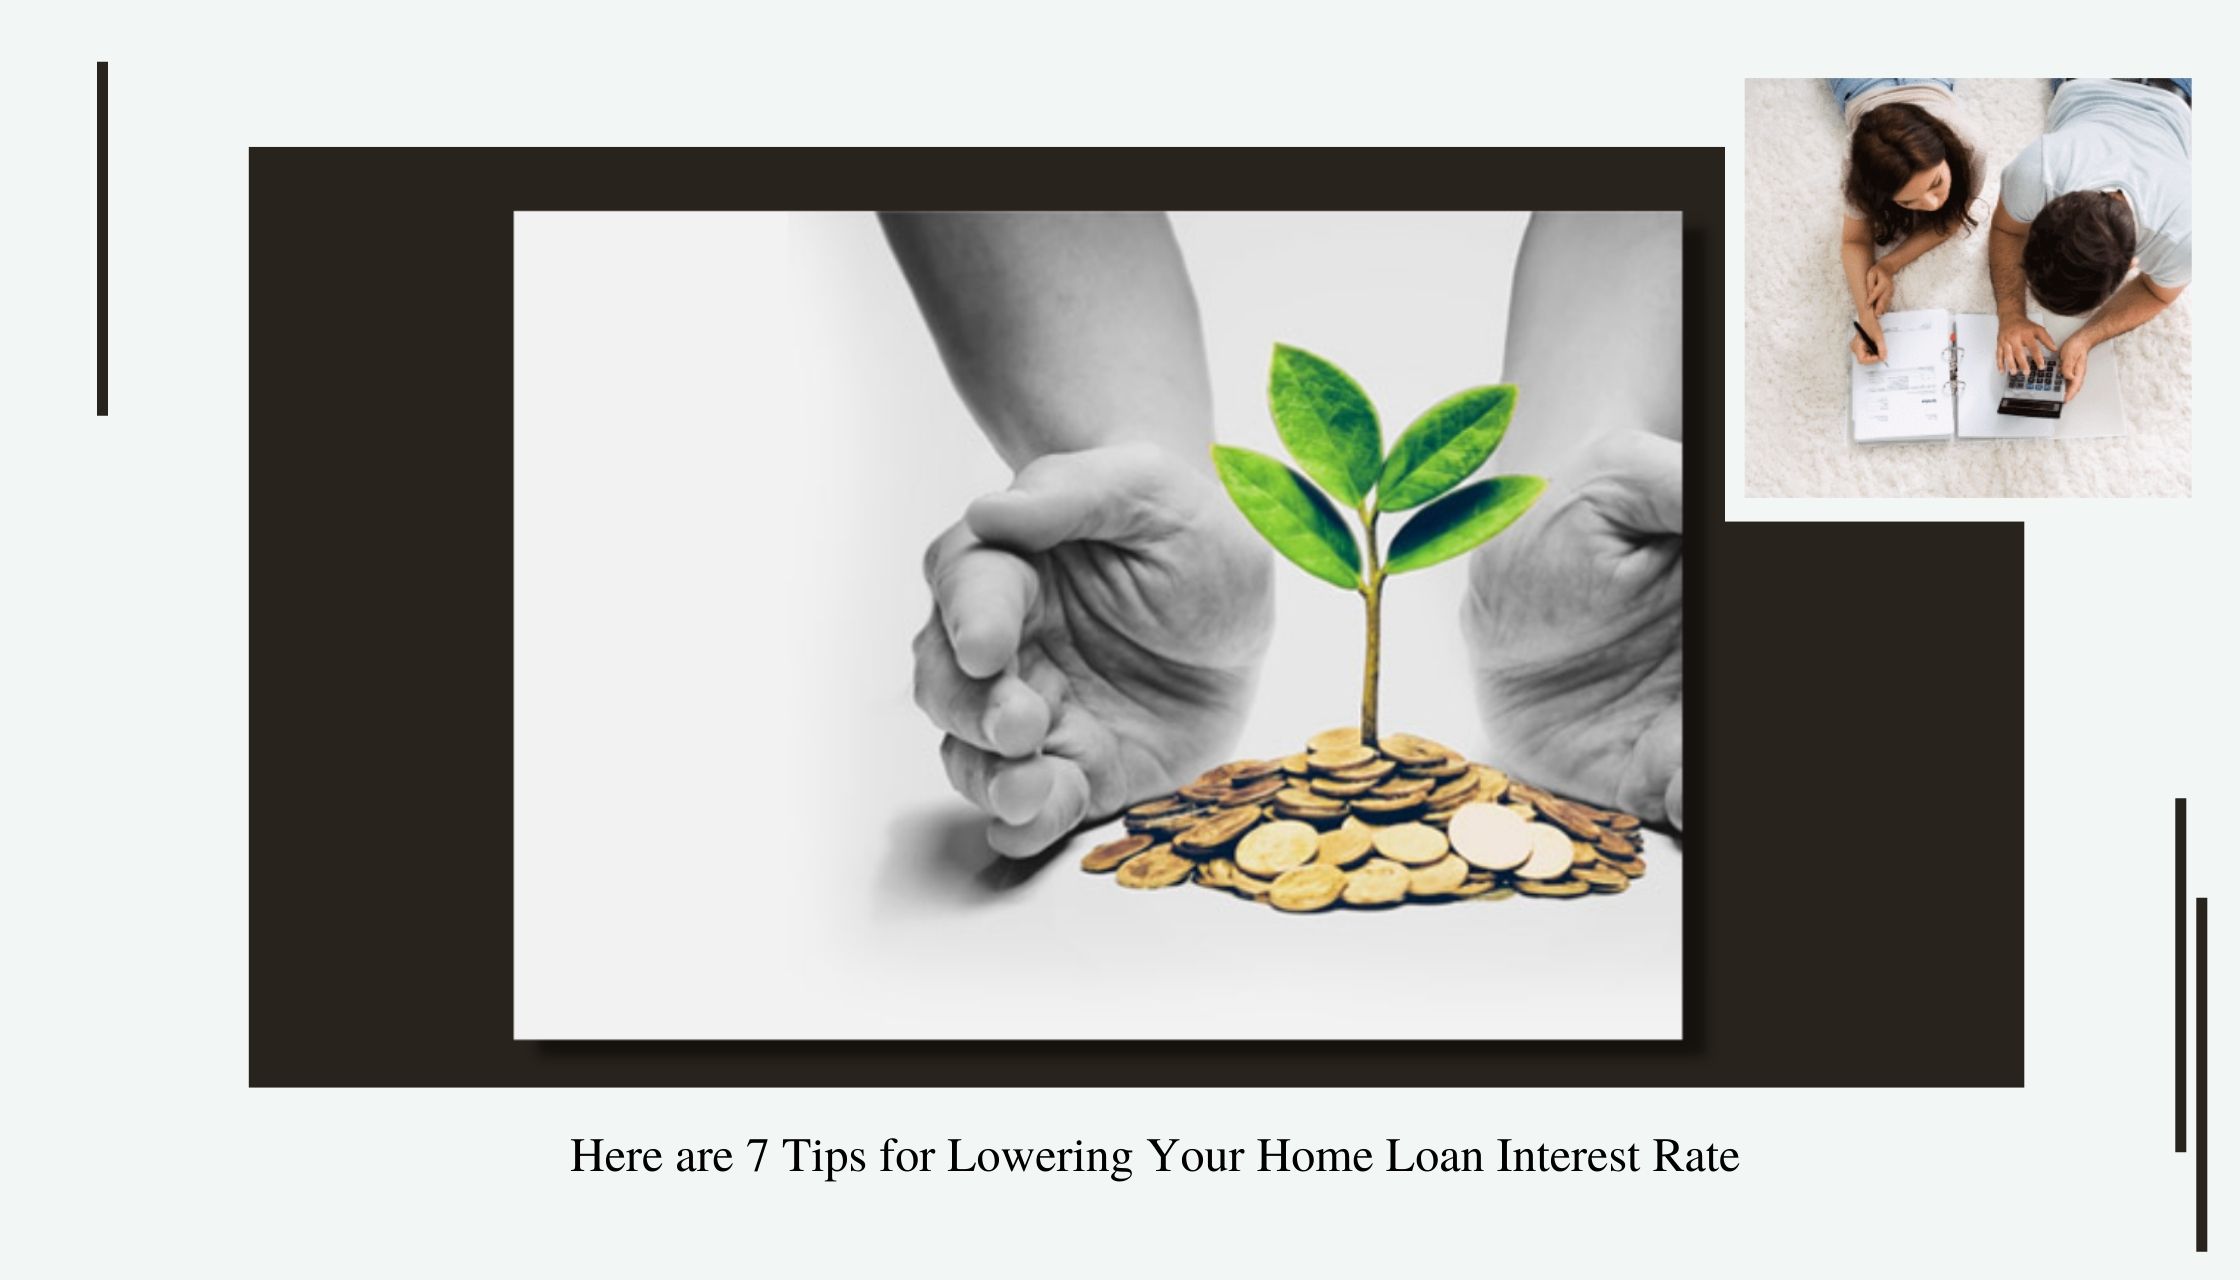 Here are 7 Tips for Lowering Your Home Loan Interest Rate